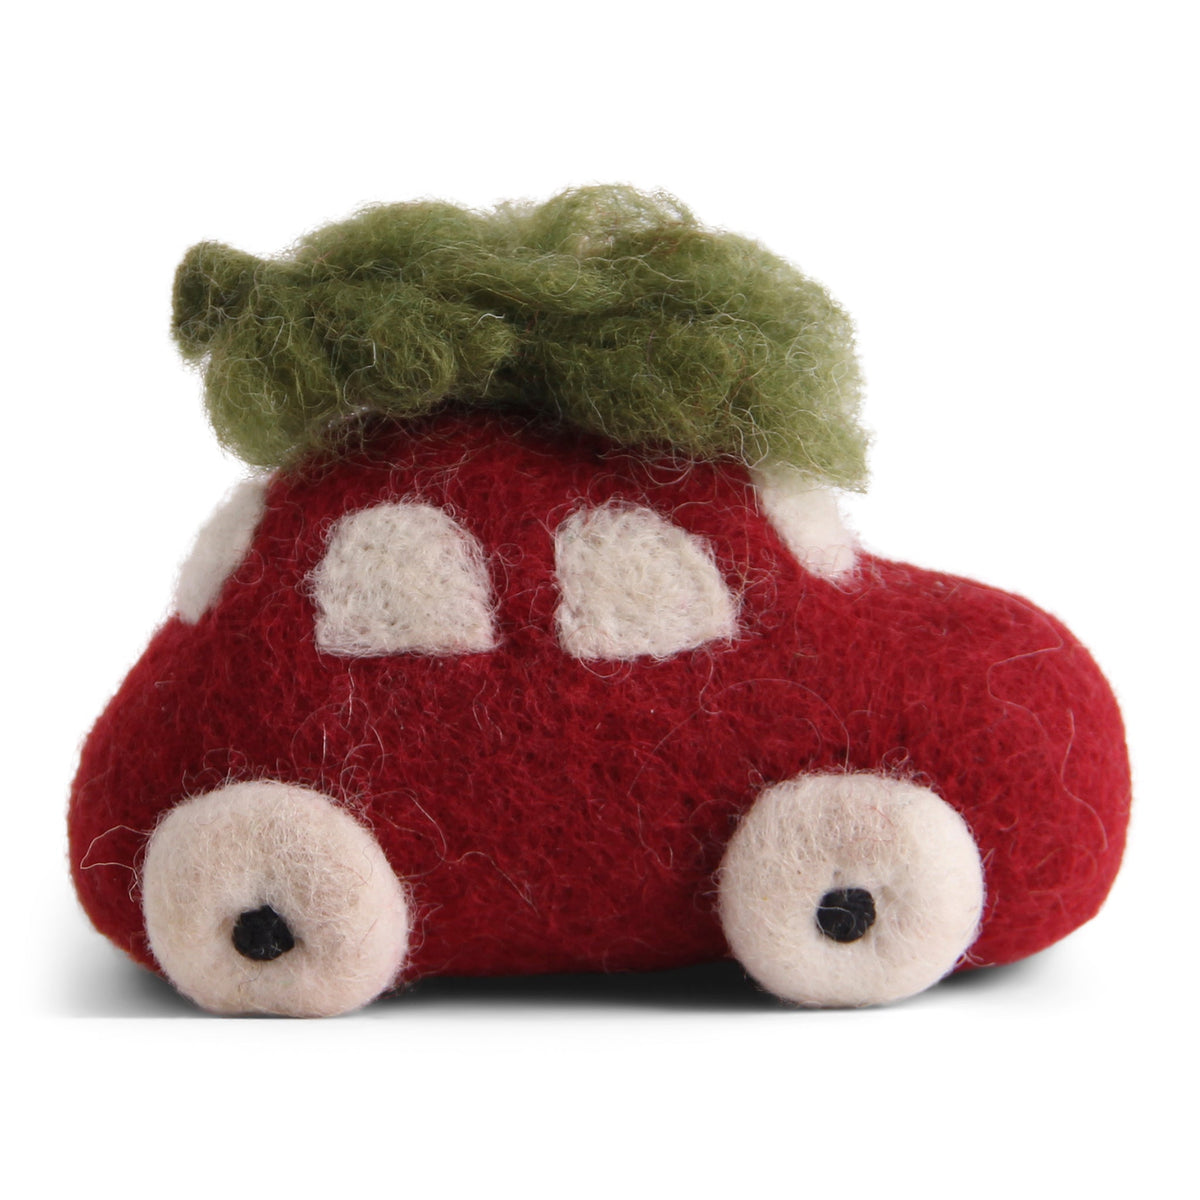 Red Car with Tree Christmas Ornament by Én Gry & Sif - Maude Kids Decor